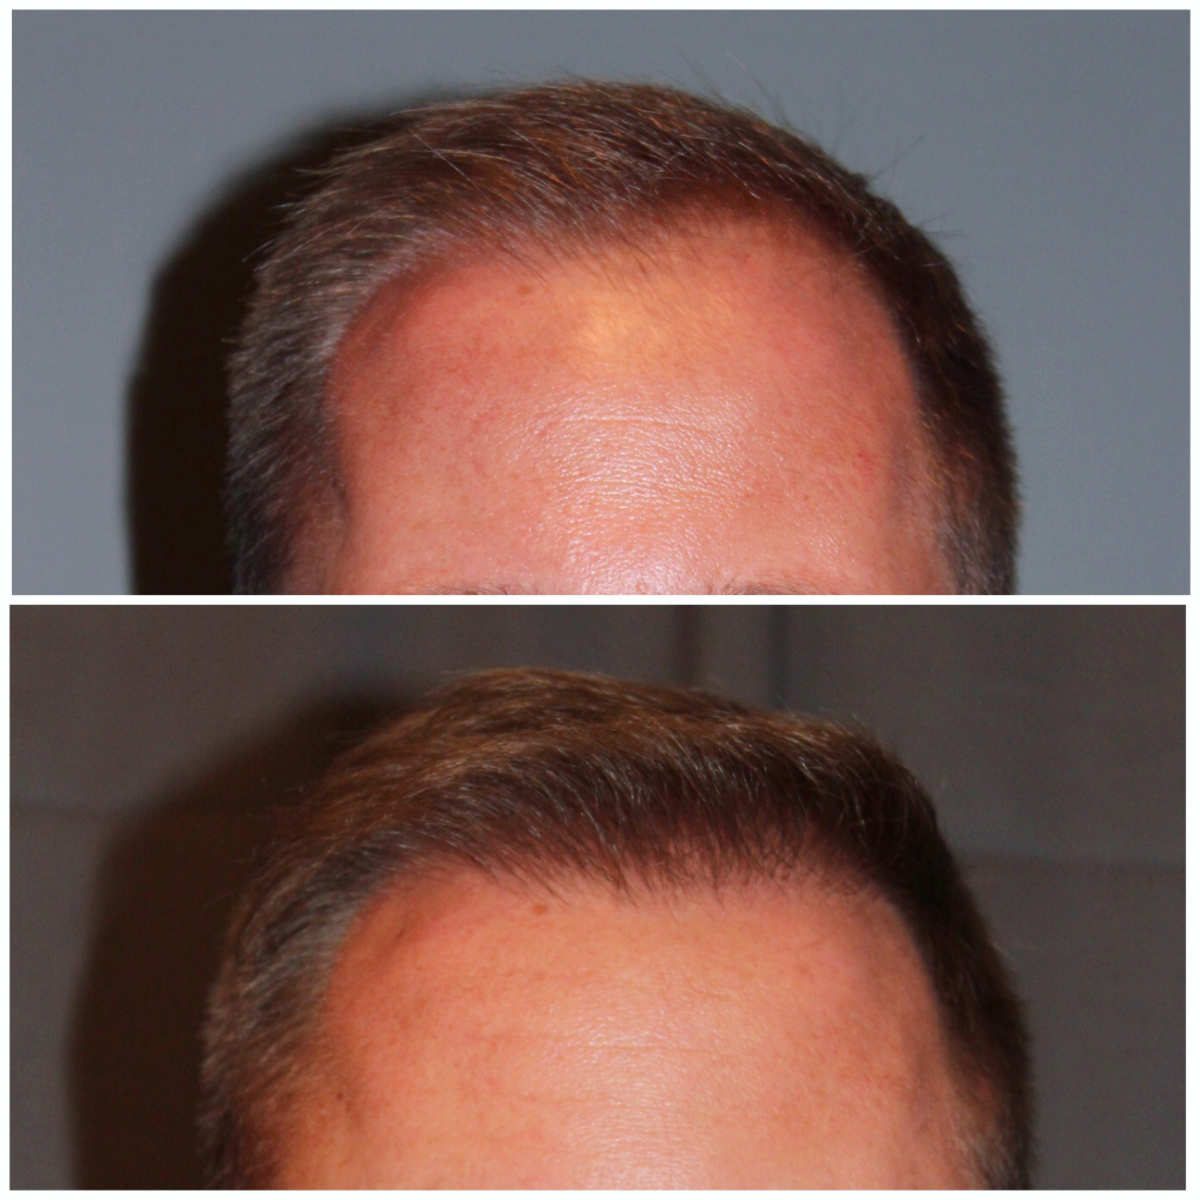 34 year old male 7 months post 2000 graft frontal hairline hair transplant. About 60% regrowth of what he will have at 18 months.